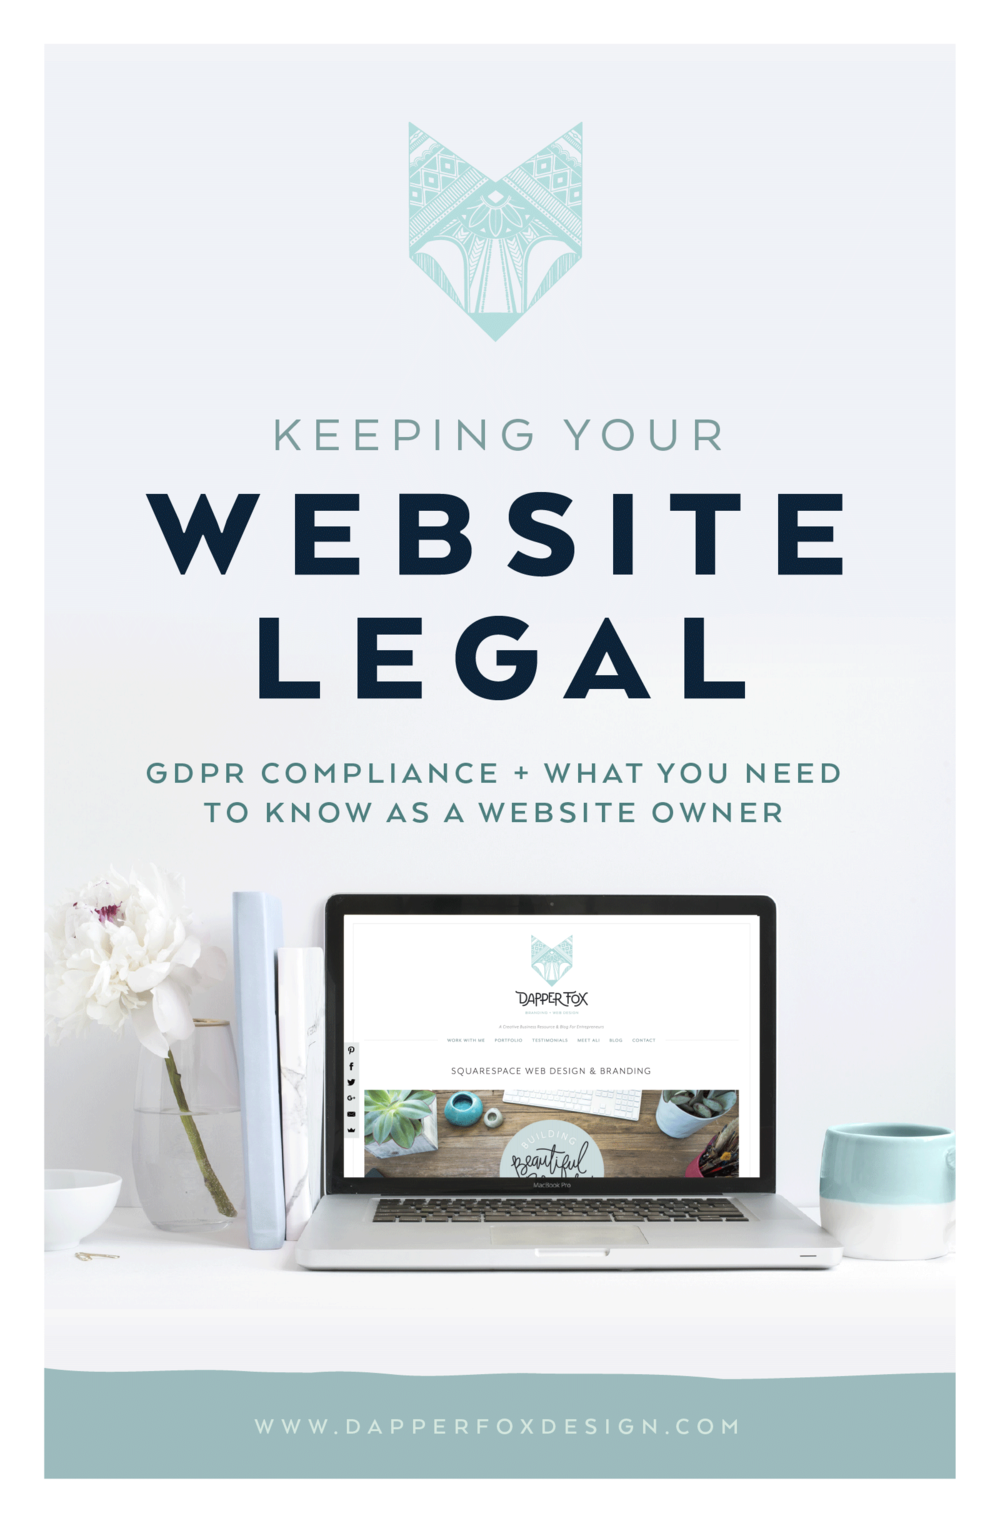 GDPR-Compliance-For-Website-Owners-and-Keeping-Your-Website-Legal.png